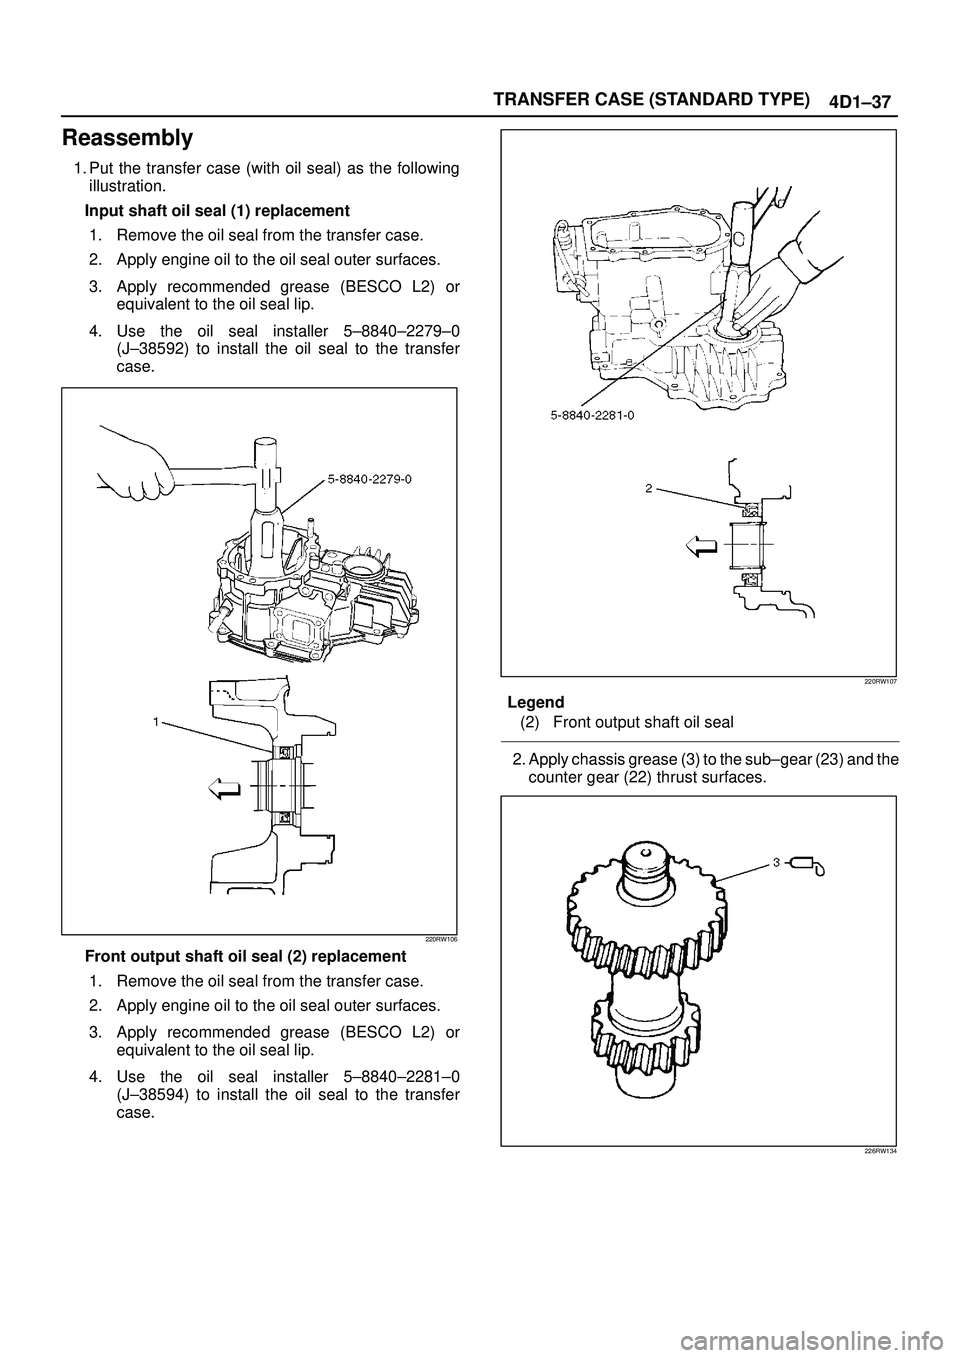 ISUZU TROOPER 1998  Service Repair Manual TRANSFER CASE (STANDARD TYPE)
4D1±37
Reassembly
1. Put the transfer case (with oil seal) as the following
illustration.
Input shaft oil seal (1) replacement
1. Remove the oil seal from the transfer c